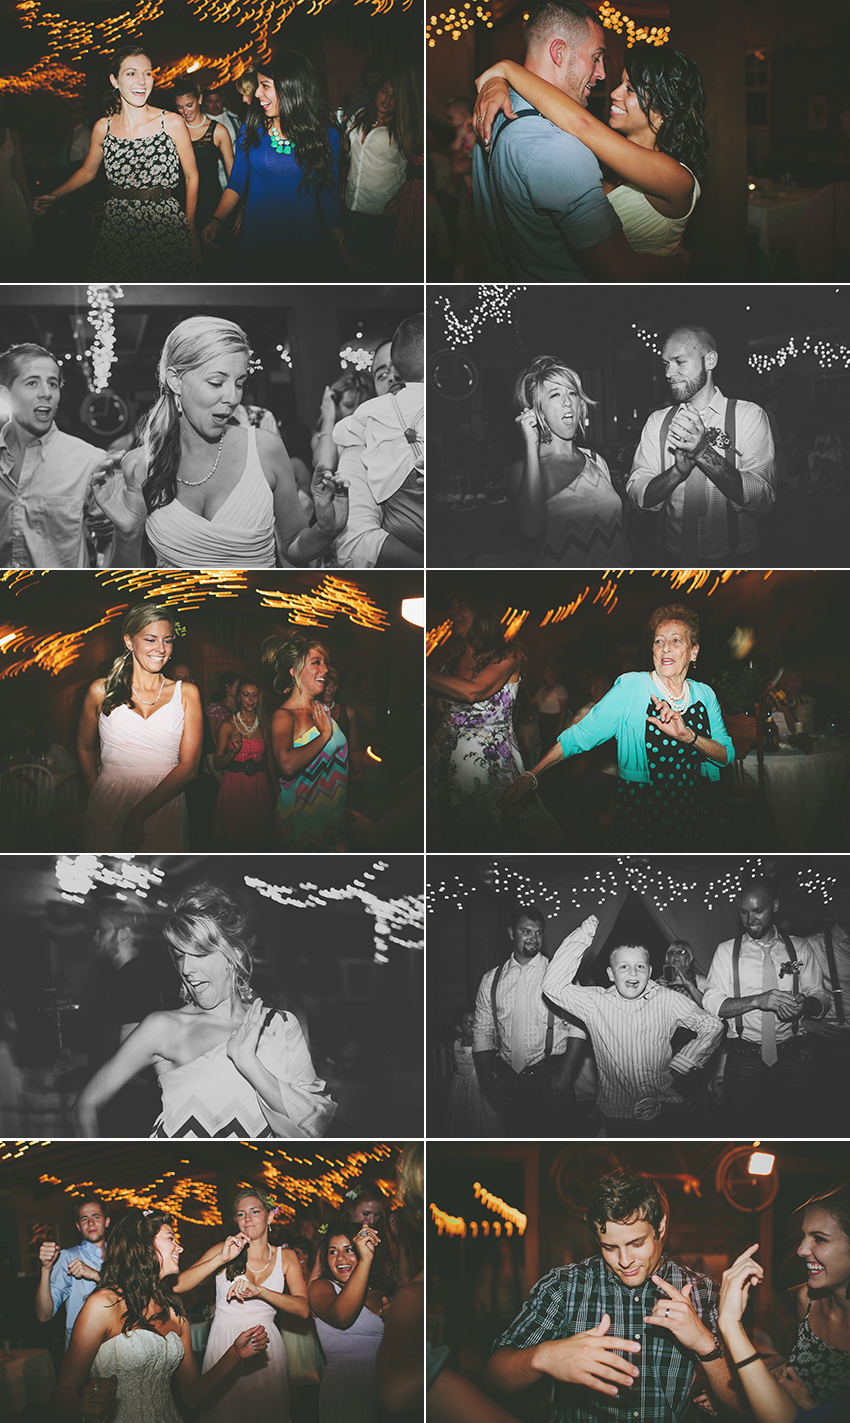 Dance party at the barn wedding reception at Sweetfields Farm in Florida